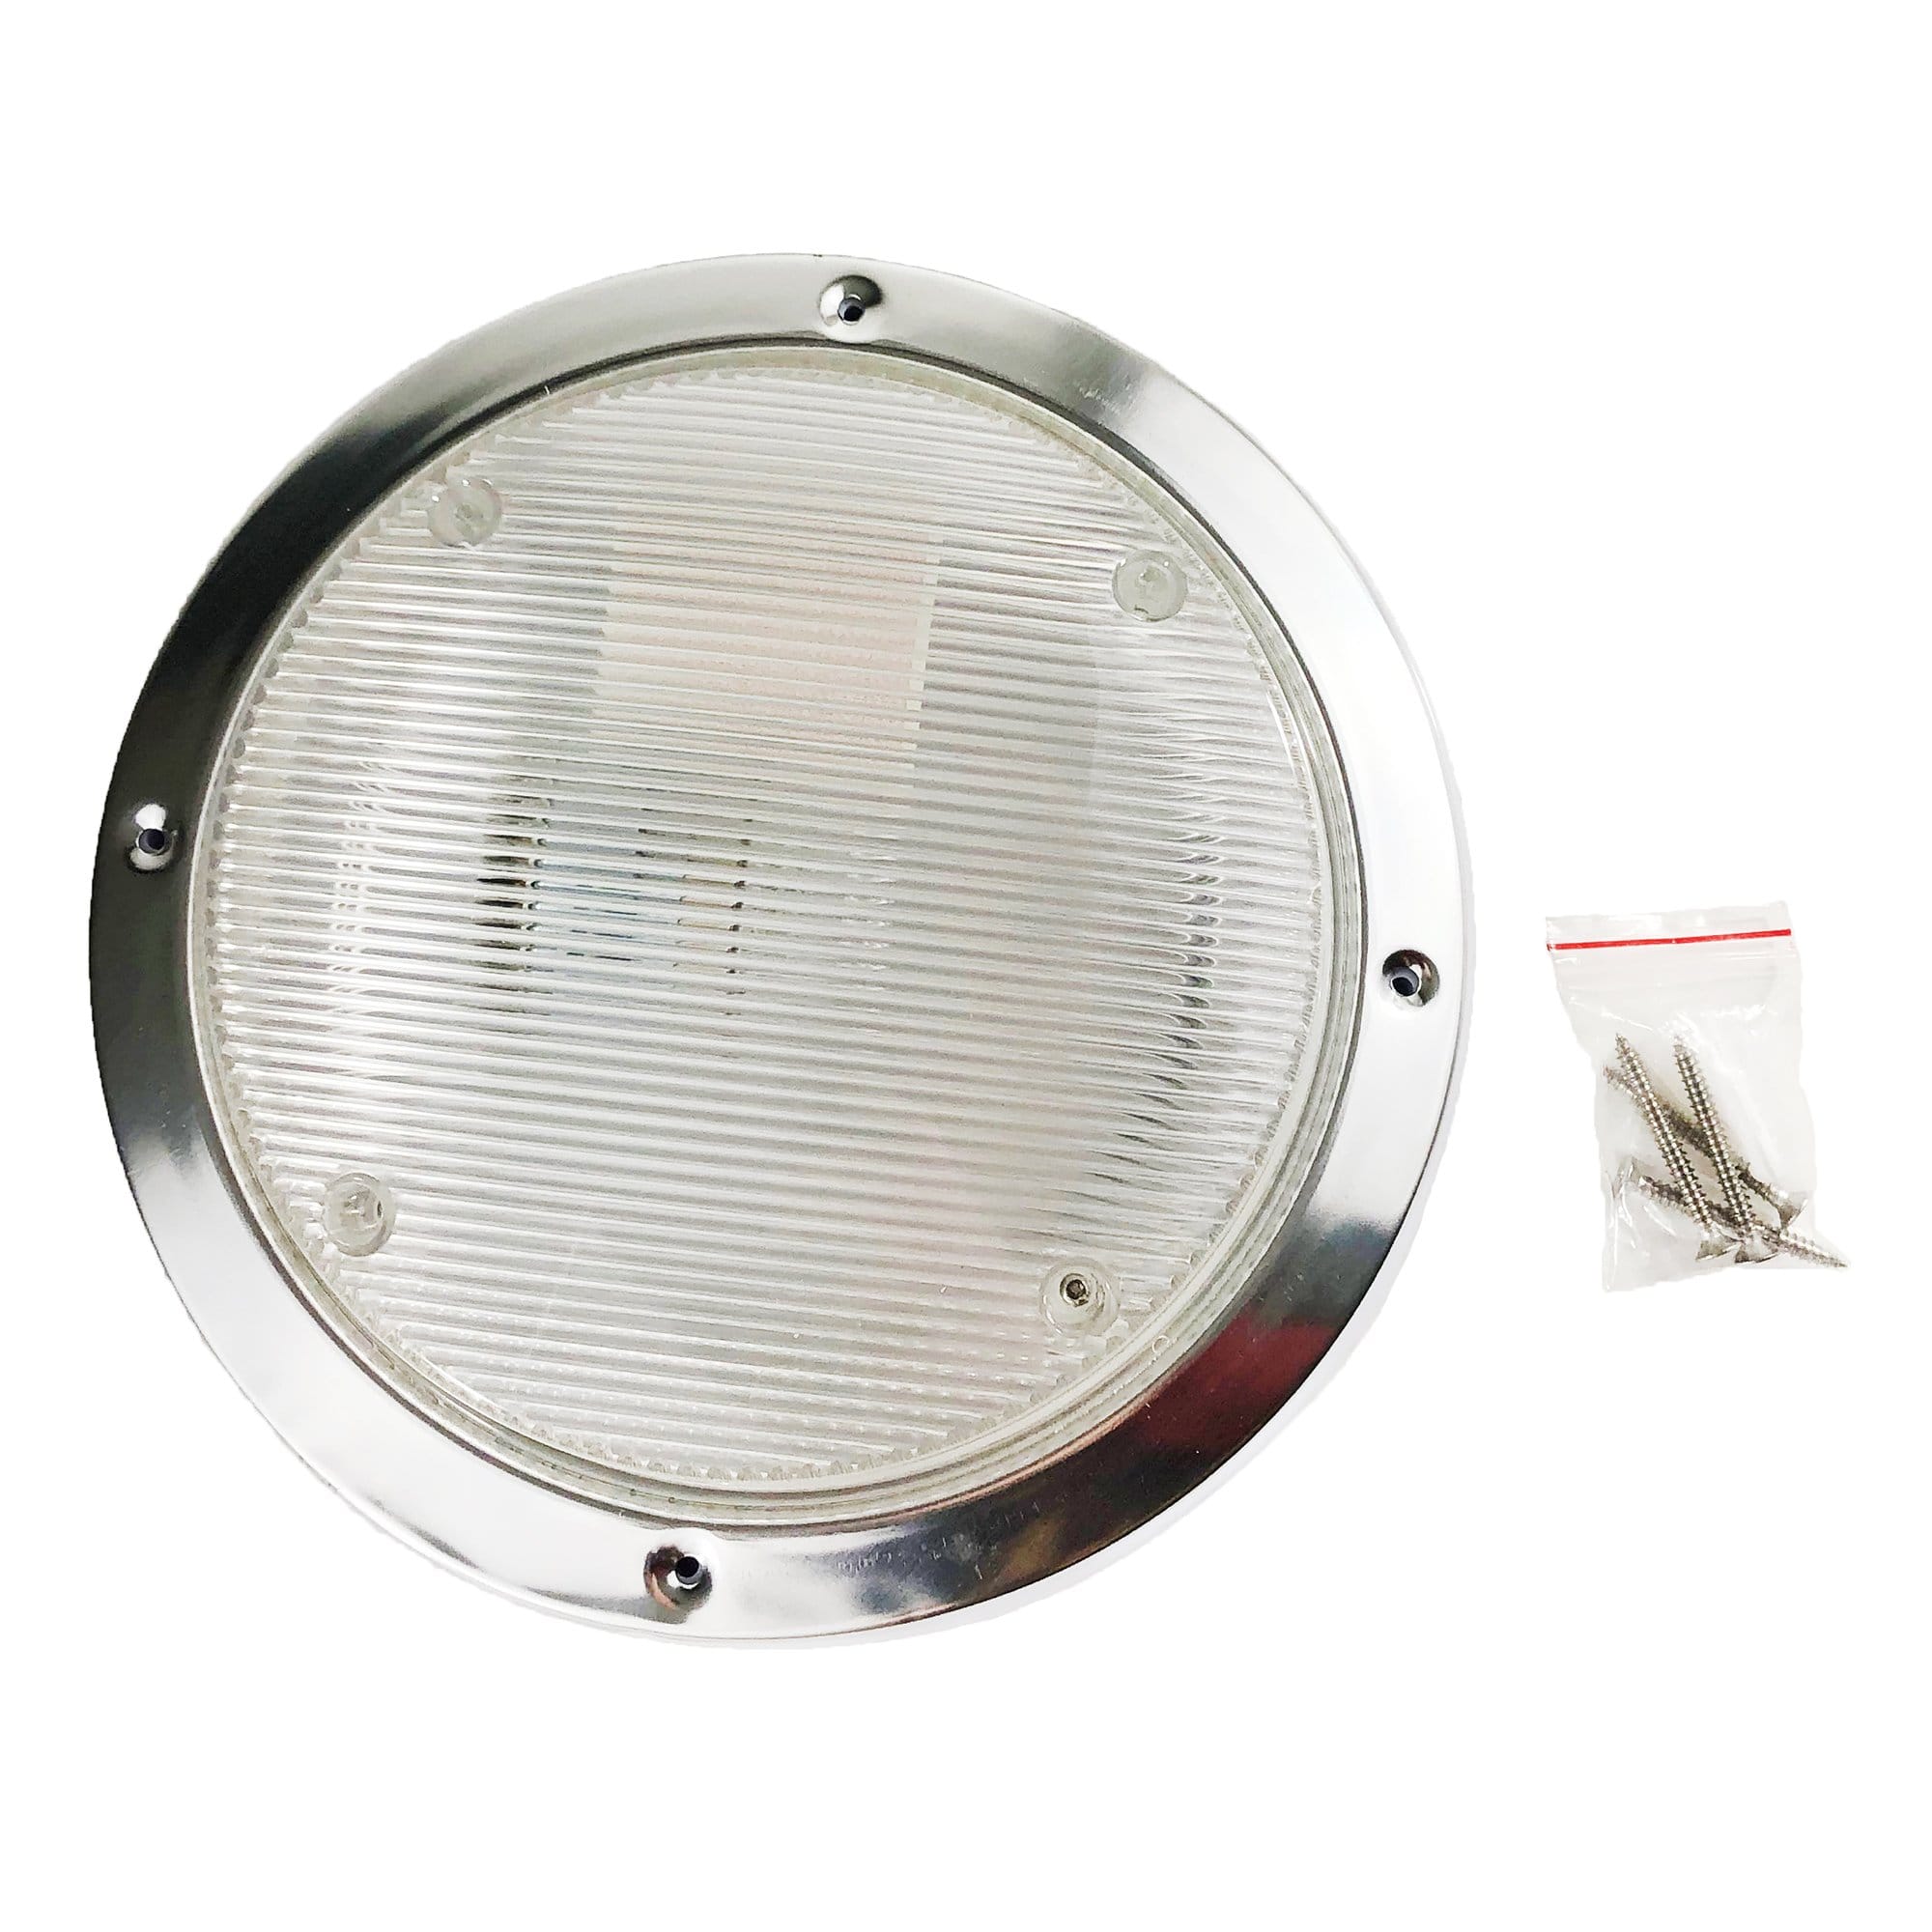 AP Products 016-RSL2000 Round Overhead Dome Light Replacement, White